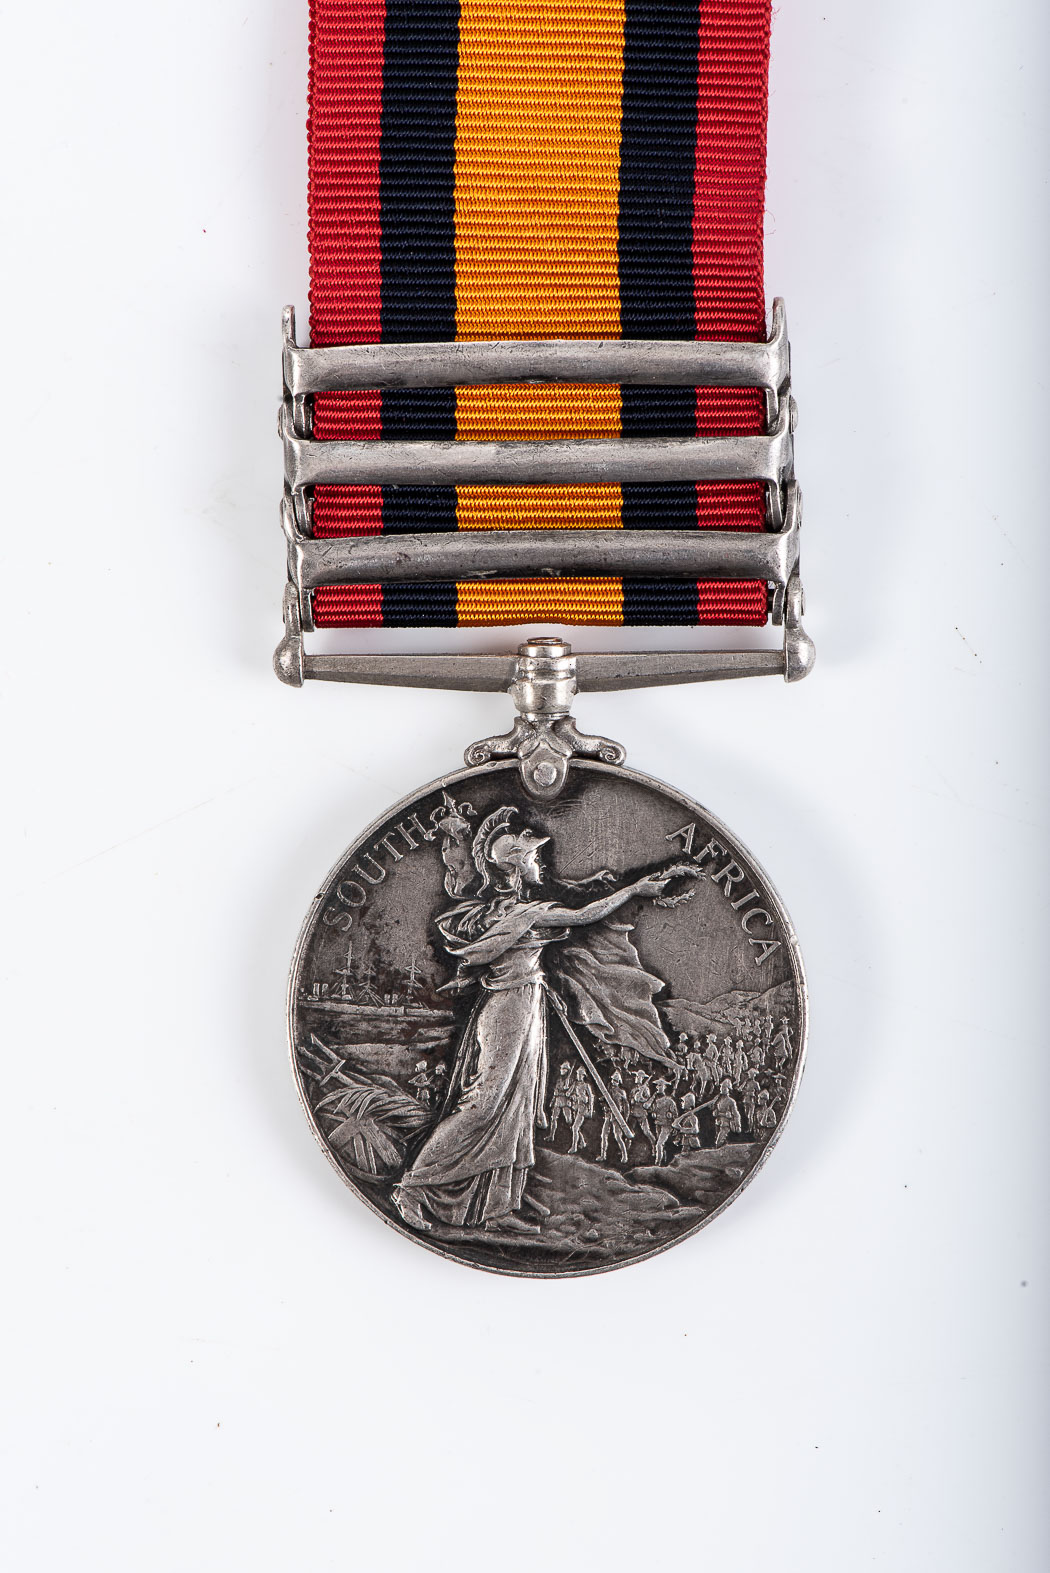 BOER WAR QUEENS SOUTH AFRICA MEDAL WITH 3 CLASPS Boer War Queens South Africa medal with three - Image 2 of 3